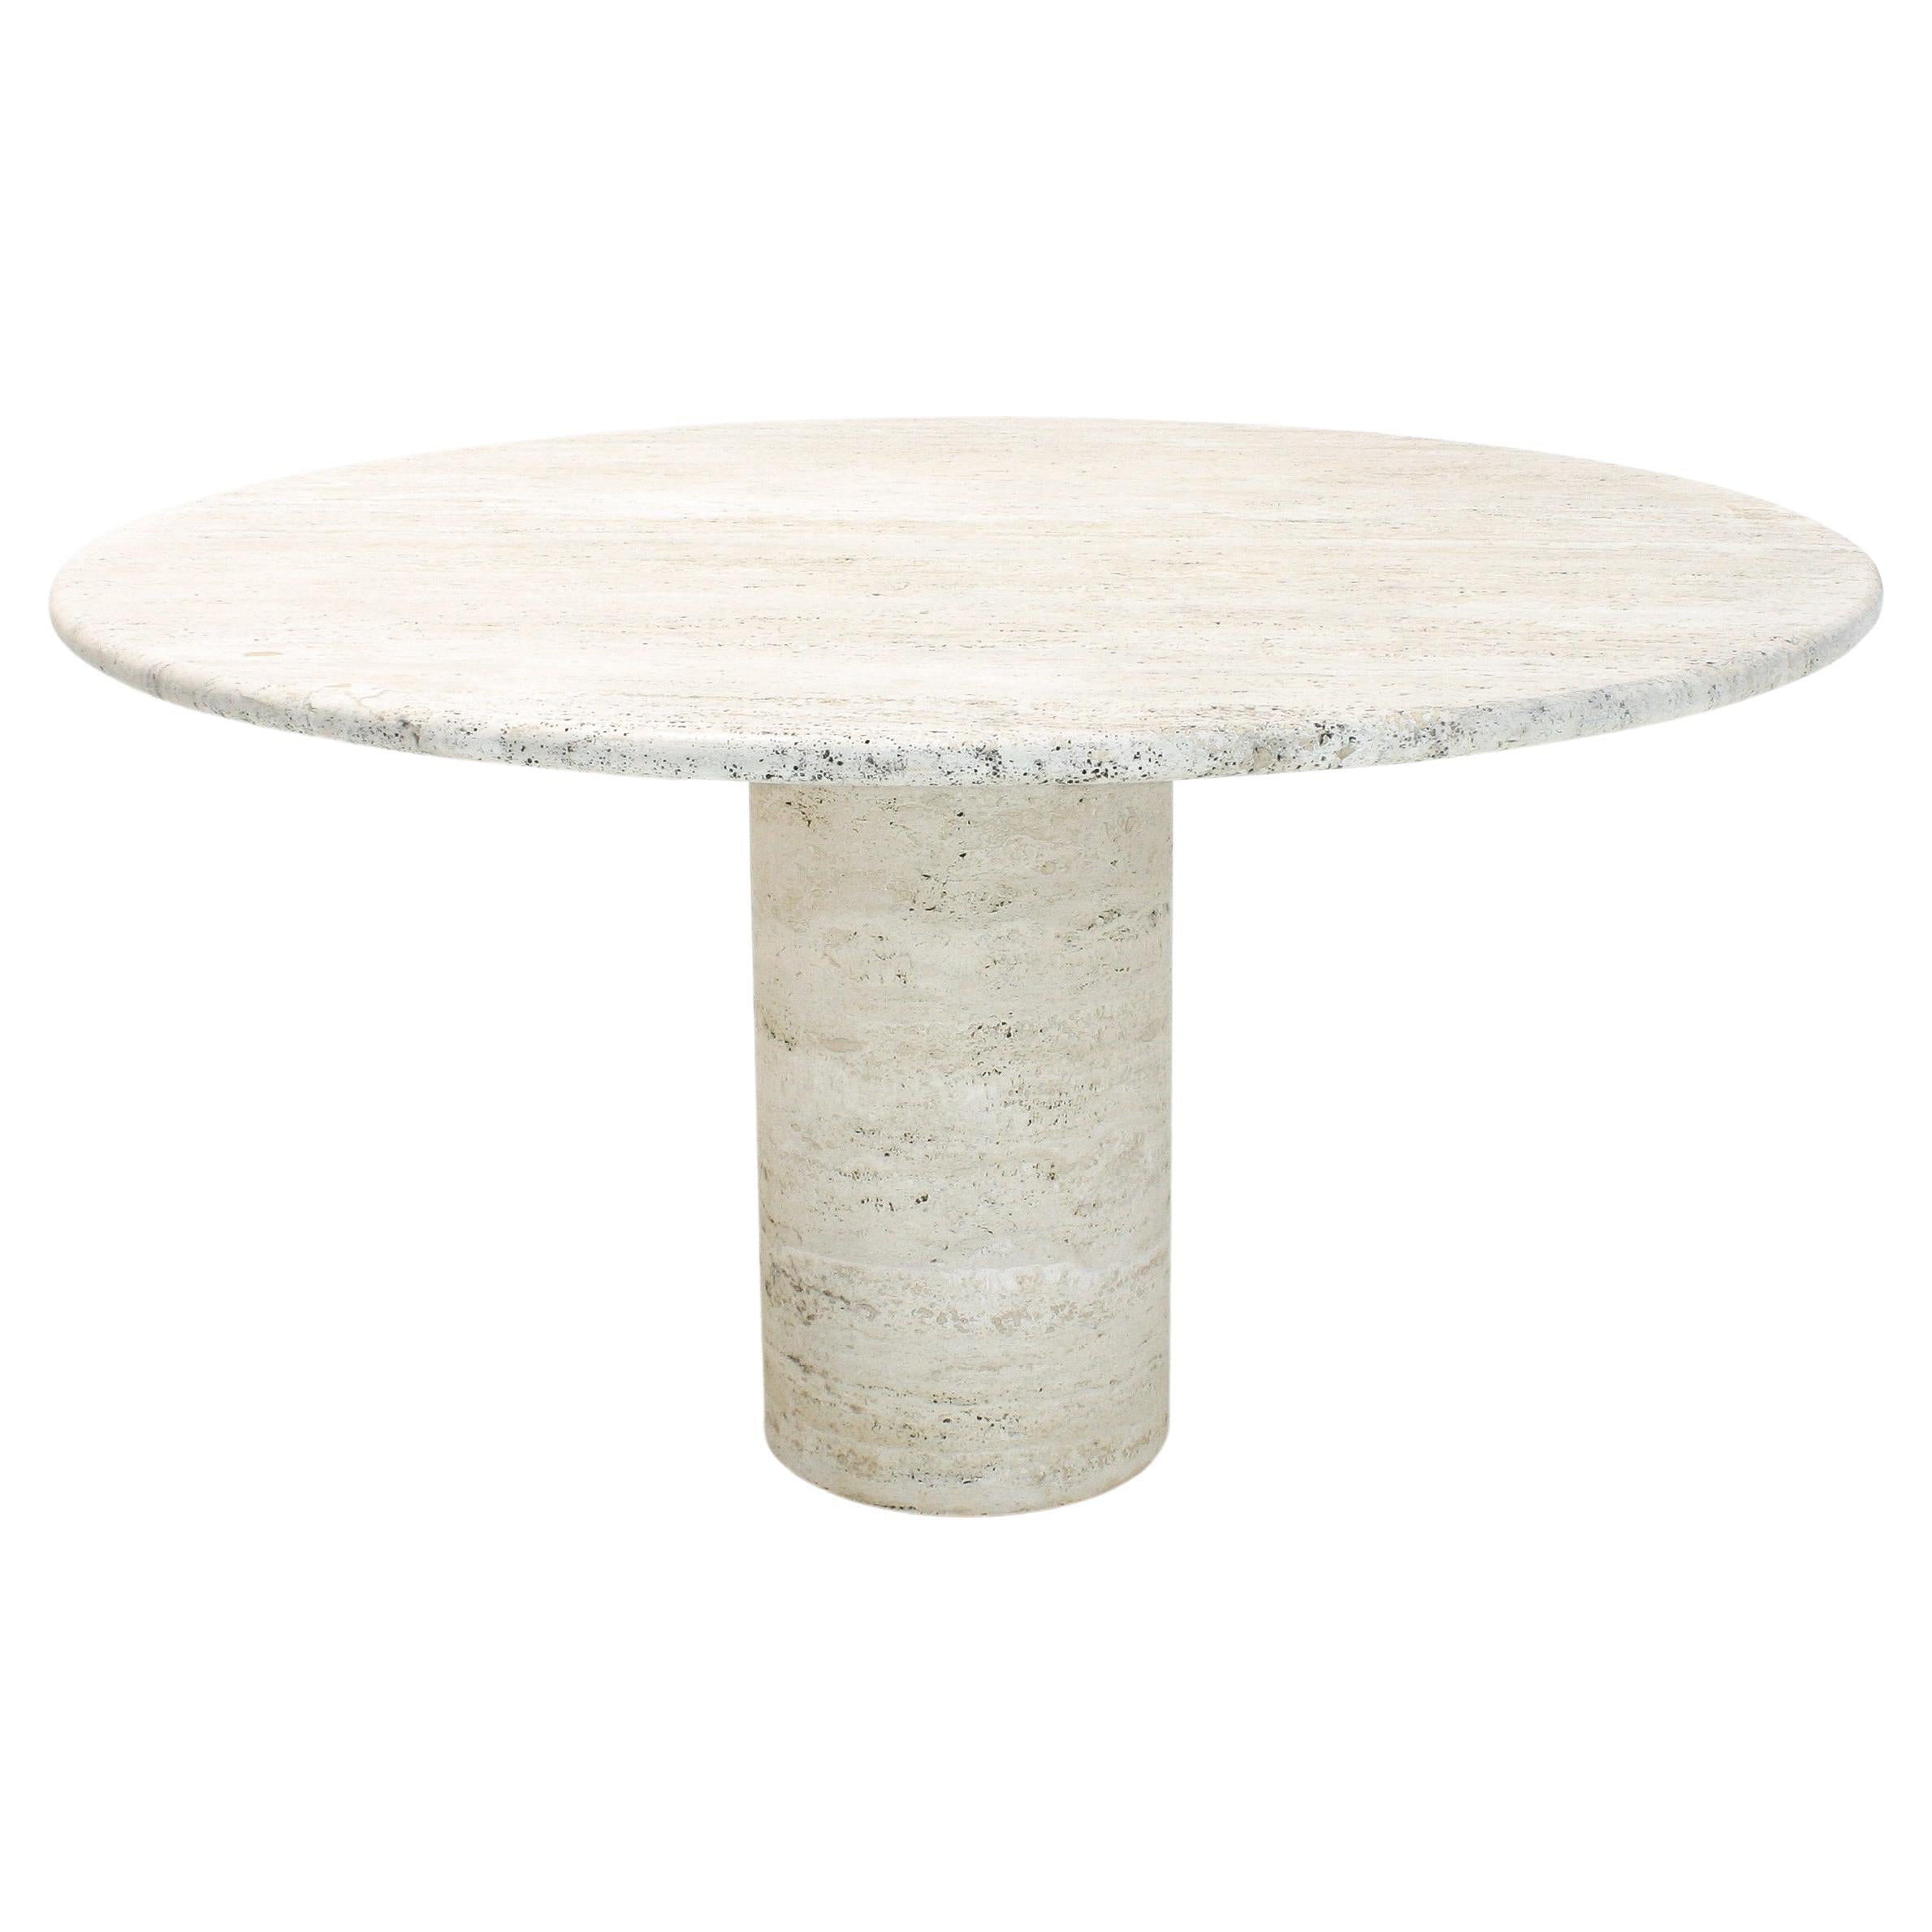 Travertine Round Dining Table attributed to Angelo Mangiarotti for Up&Up, 1970s For Sale